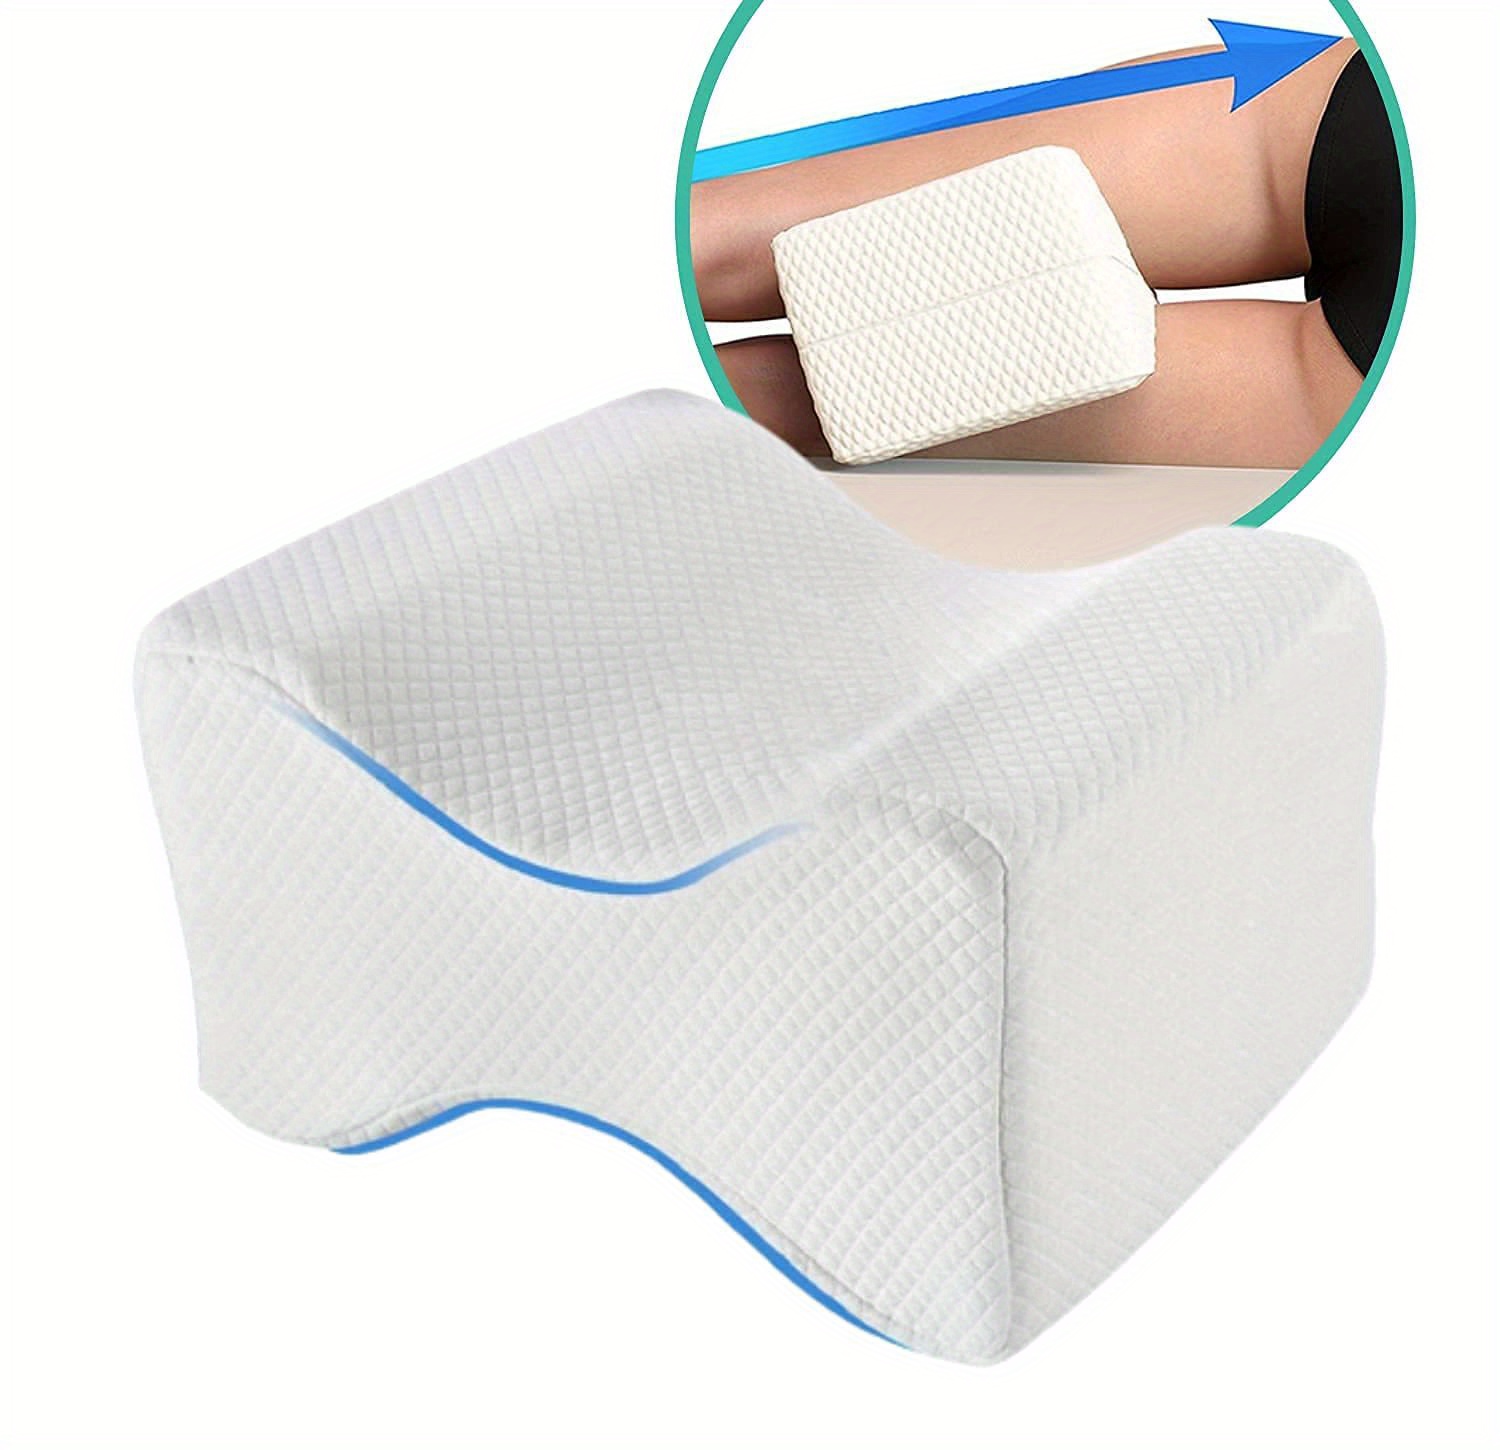 1Pcs Leg & Knee Foam Support Pillow for Side Sleepers - Memory Foam Leg  Pillow for Sleeping, Pain Relief for Sciatica, Joints.. - AliExpress